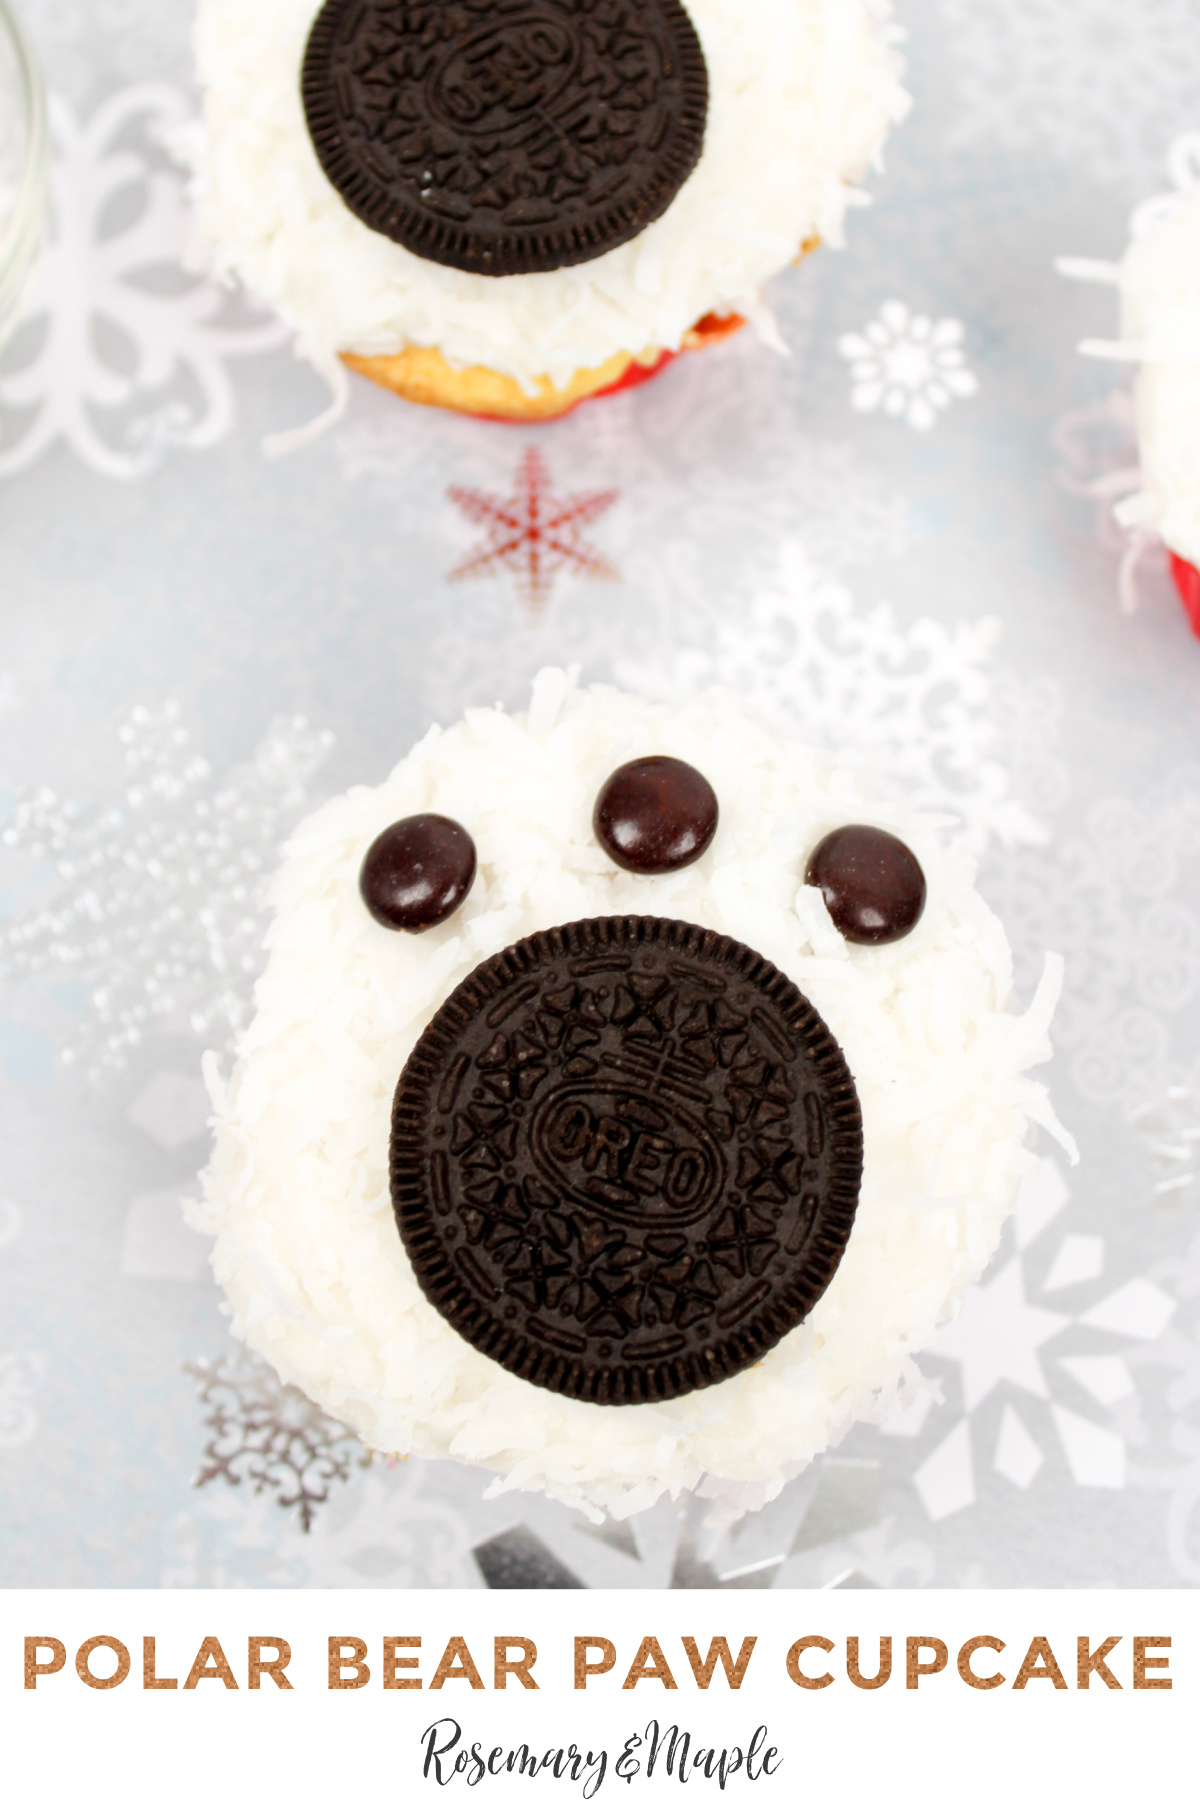 These adorable Polar Bear Paw Cupcakes are perfect for any winter or holiday party. They're easy to make and can be decorated in minutes.